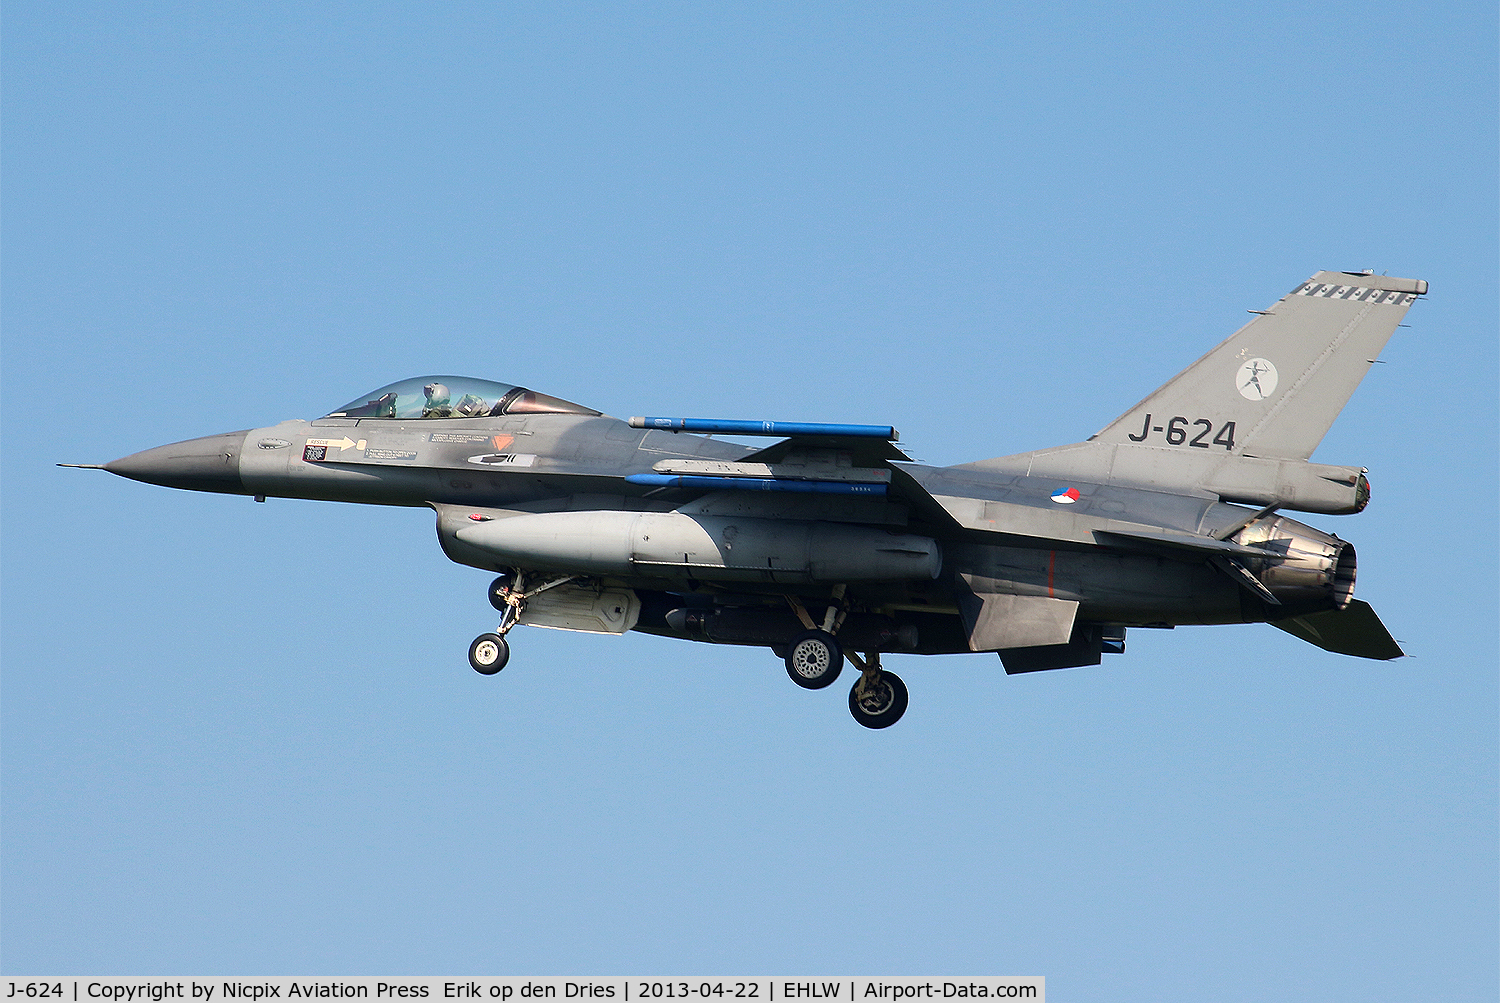 J-624, Fokker F-16A Fighting Falcon C/N 6D-56, J-624 is assigned to the 323 TATESS sqn and based at Leeuwarden AB